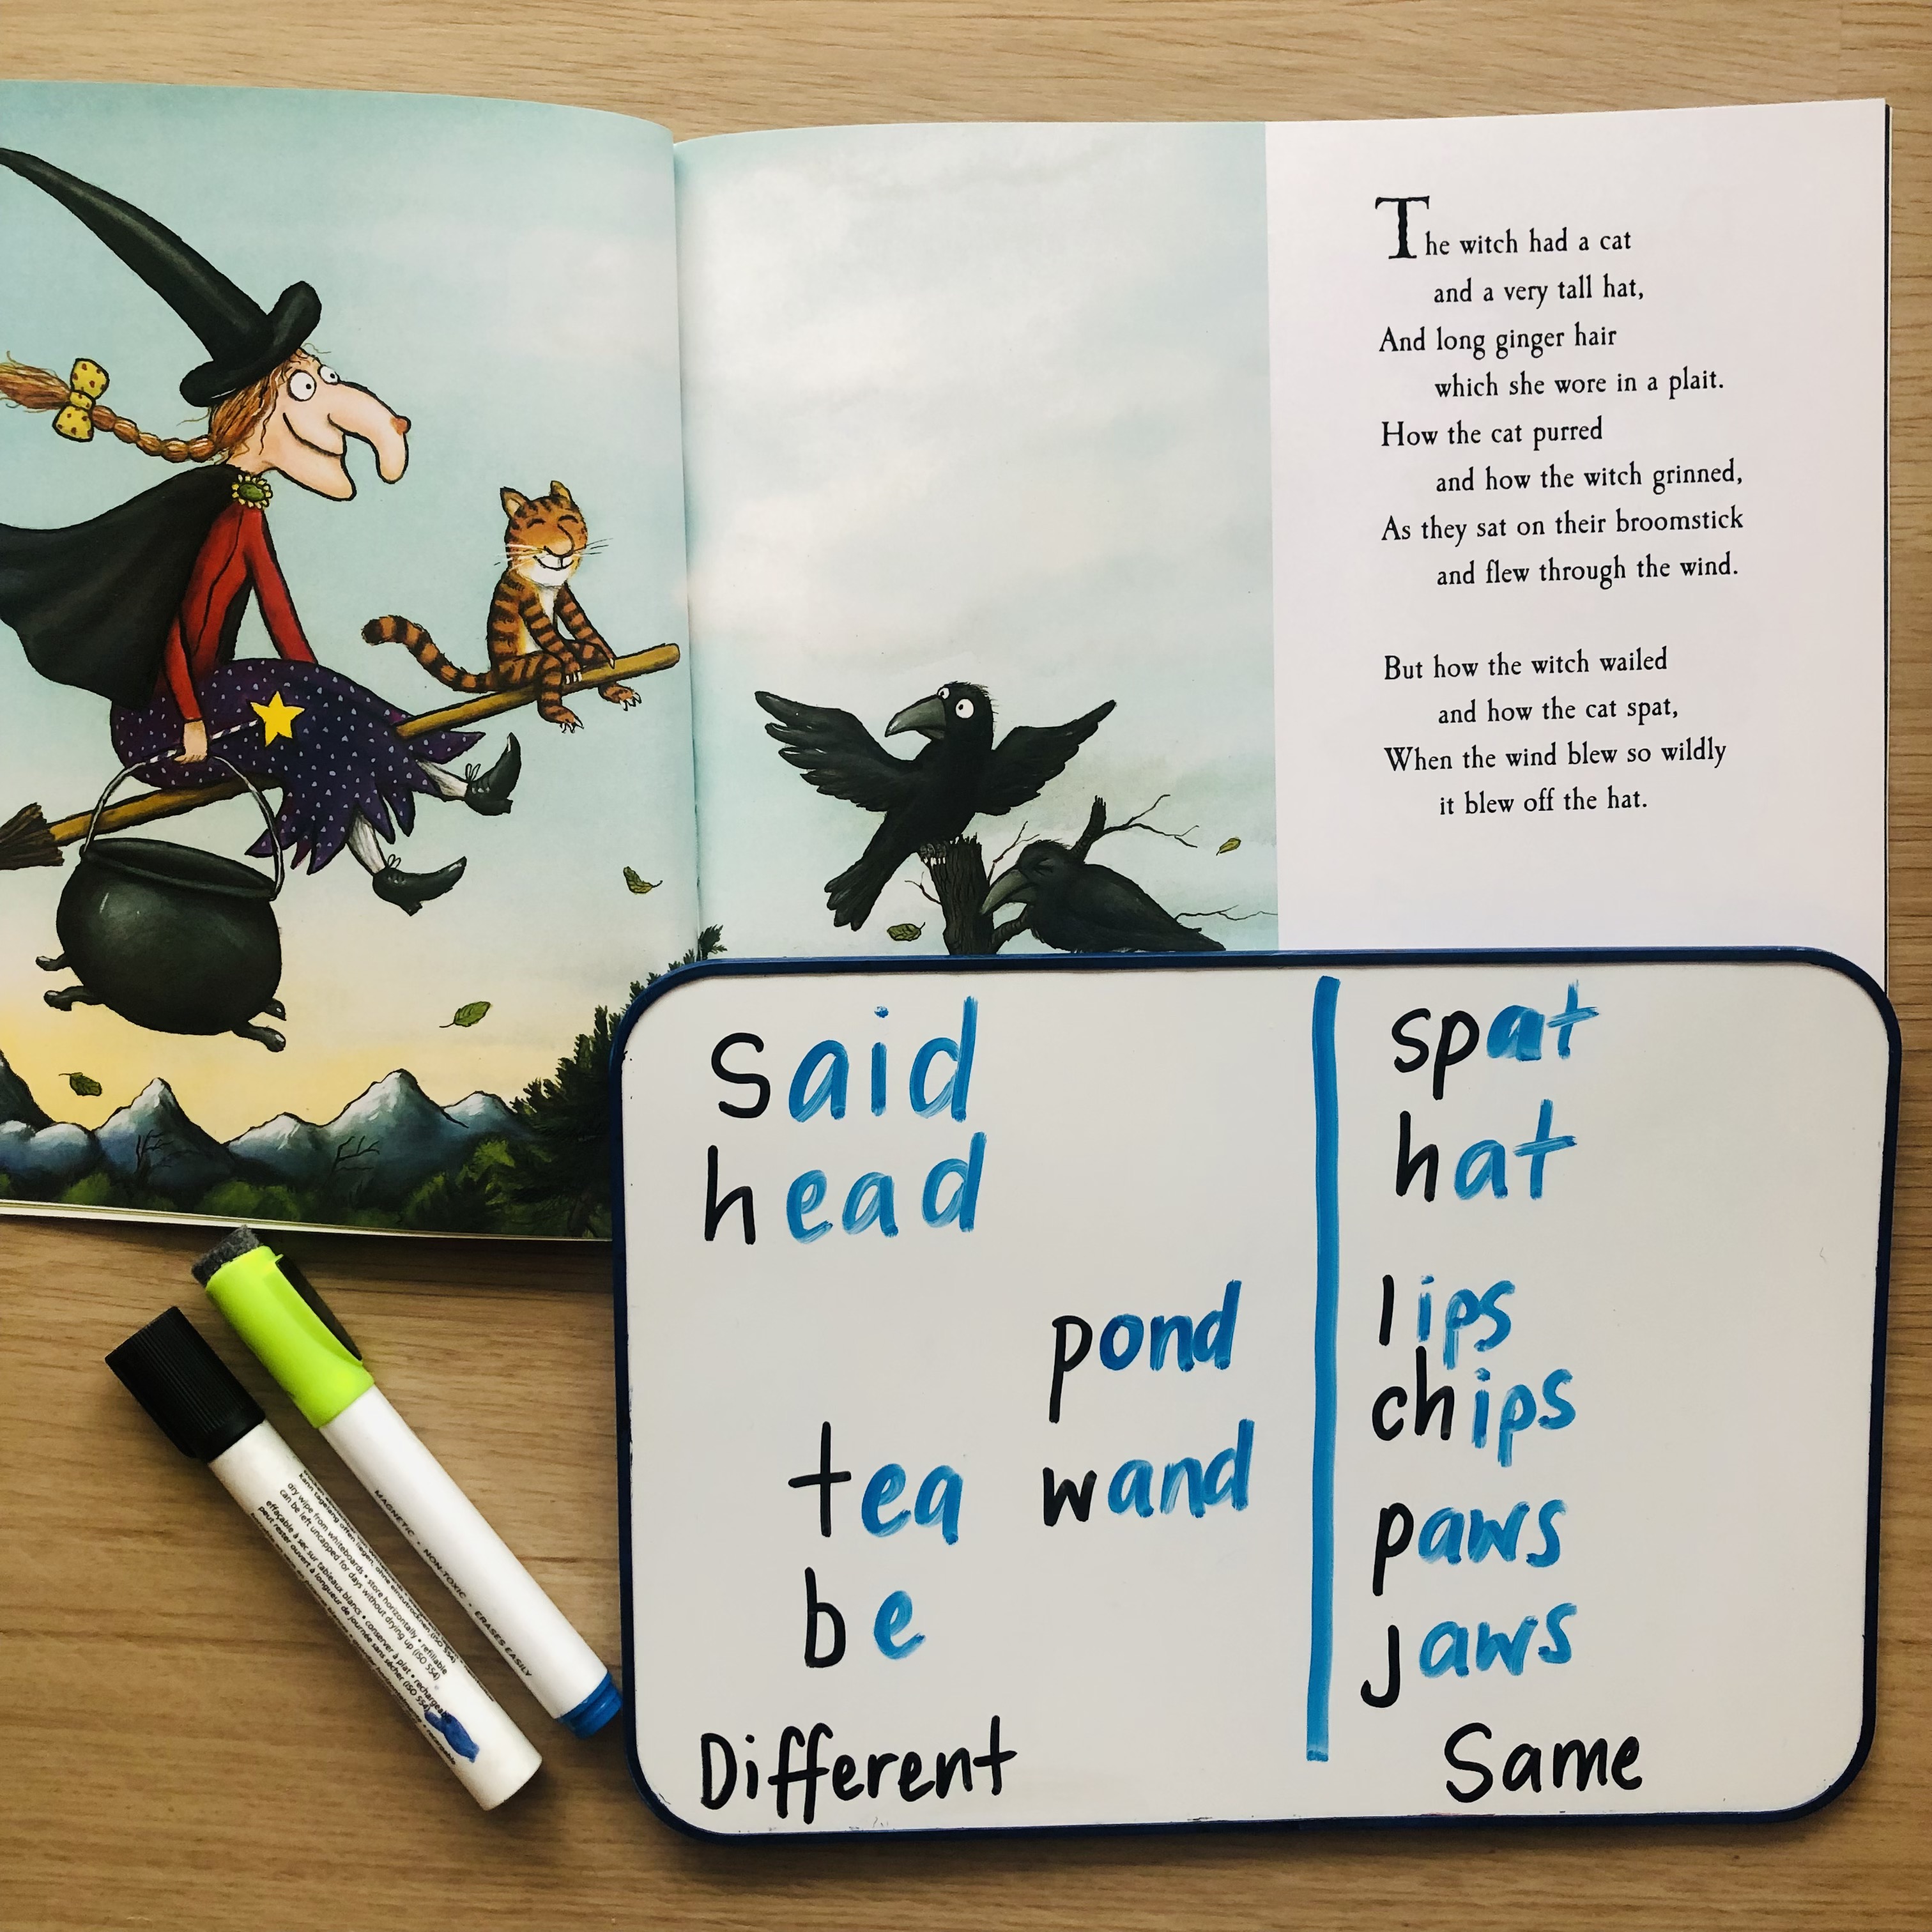 A fun phonics lesson exploring the various spelling patterns of rhyming words. Here we have pairs of rhyming words from the book, ‘Room on The Boom’, written on Post-it notes and sorted into words that have the same rime, and words that do not.